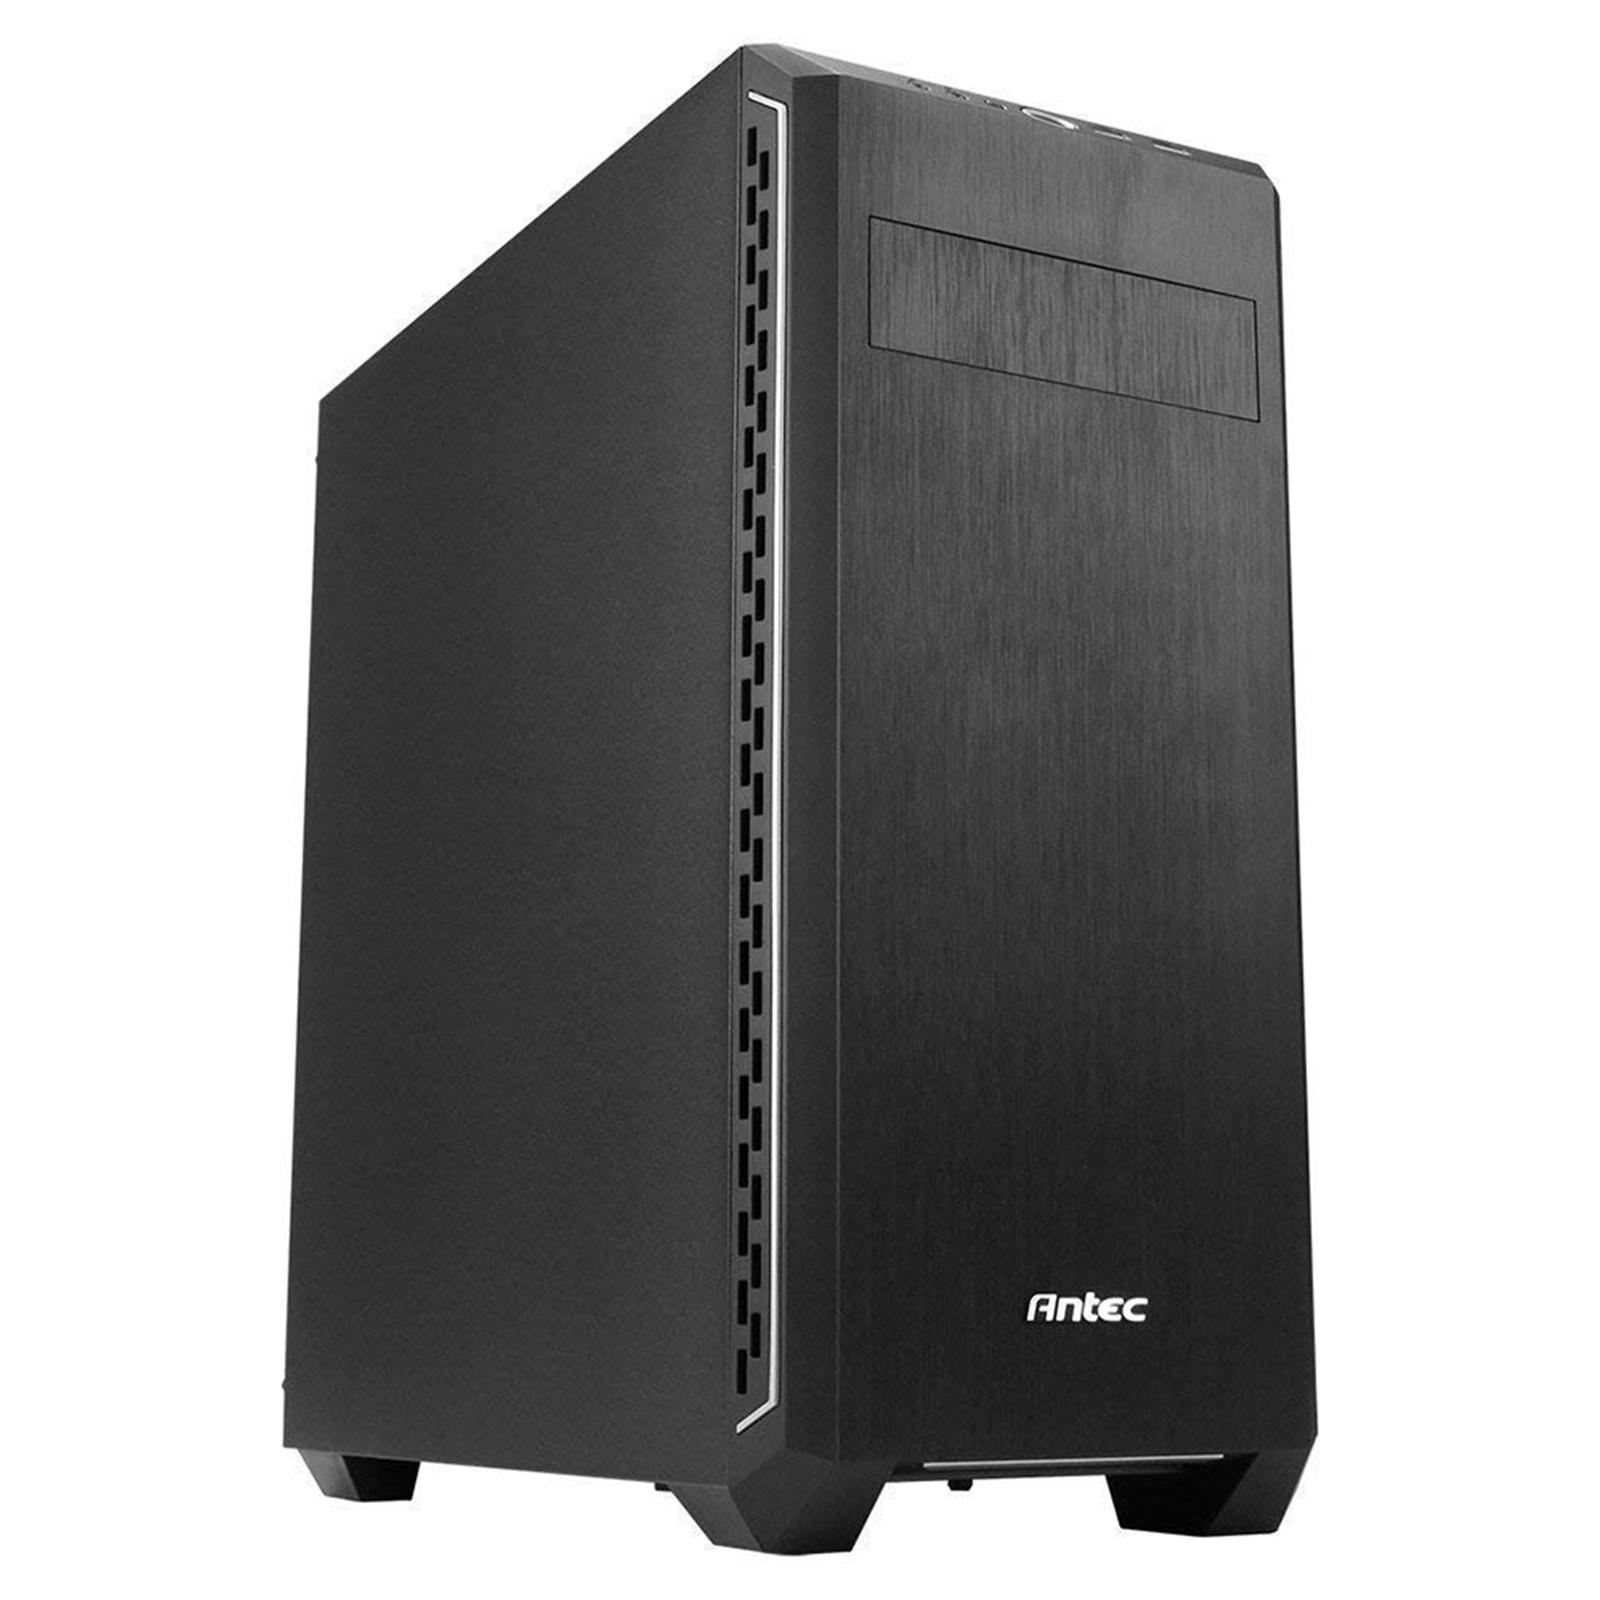 ANTEC P7 Silent Case, Elite Silent Performance Chassis, Mid Tower, 2 x USB 3.0, Sound-Dampening Side Panels, ATX, Micro ATX, Mini-ITX